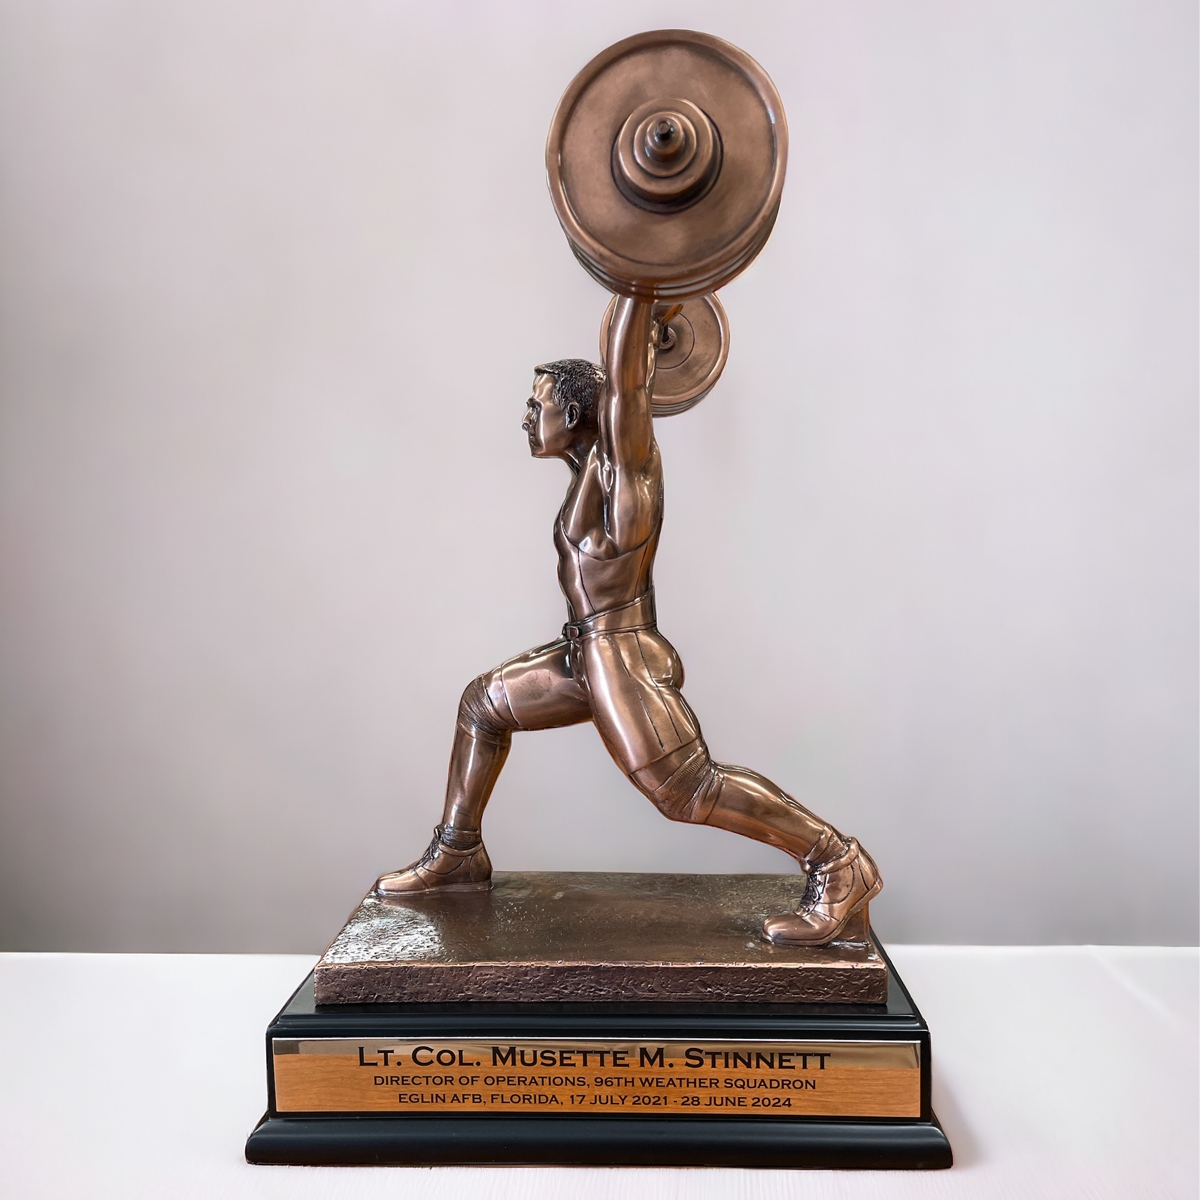 Our Powerlifting Trophy features a weightlifter completing a clean & jerk. It's a resin statue that's coated with a thin bronze metal for added detail & strength. It's mounted on a black wood base with a matching bronze colored engraving plate that can be personalized. This RFB087 trophy is 10" x 14.5" in size and weighs over 7.5 lbs.